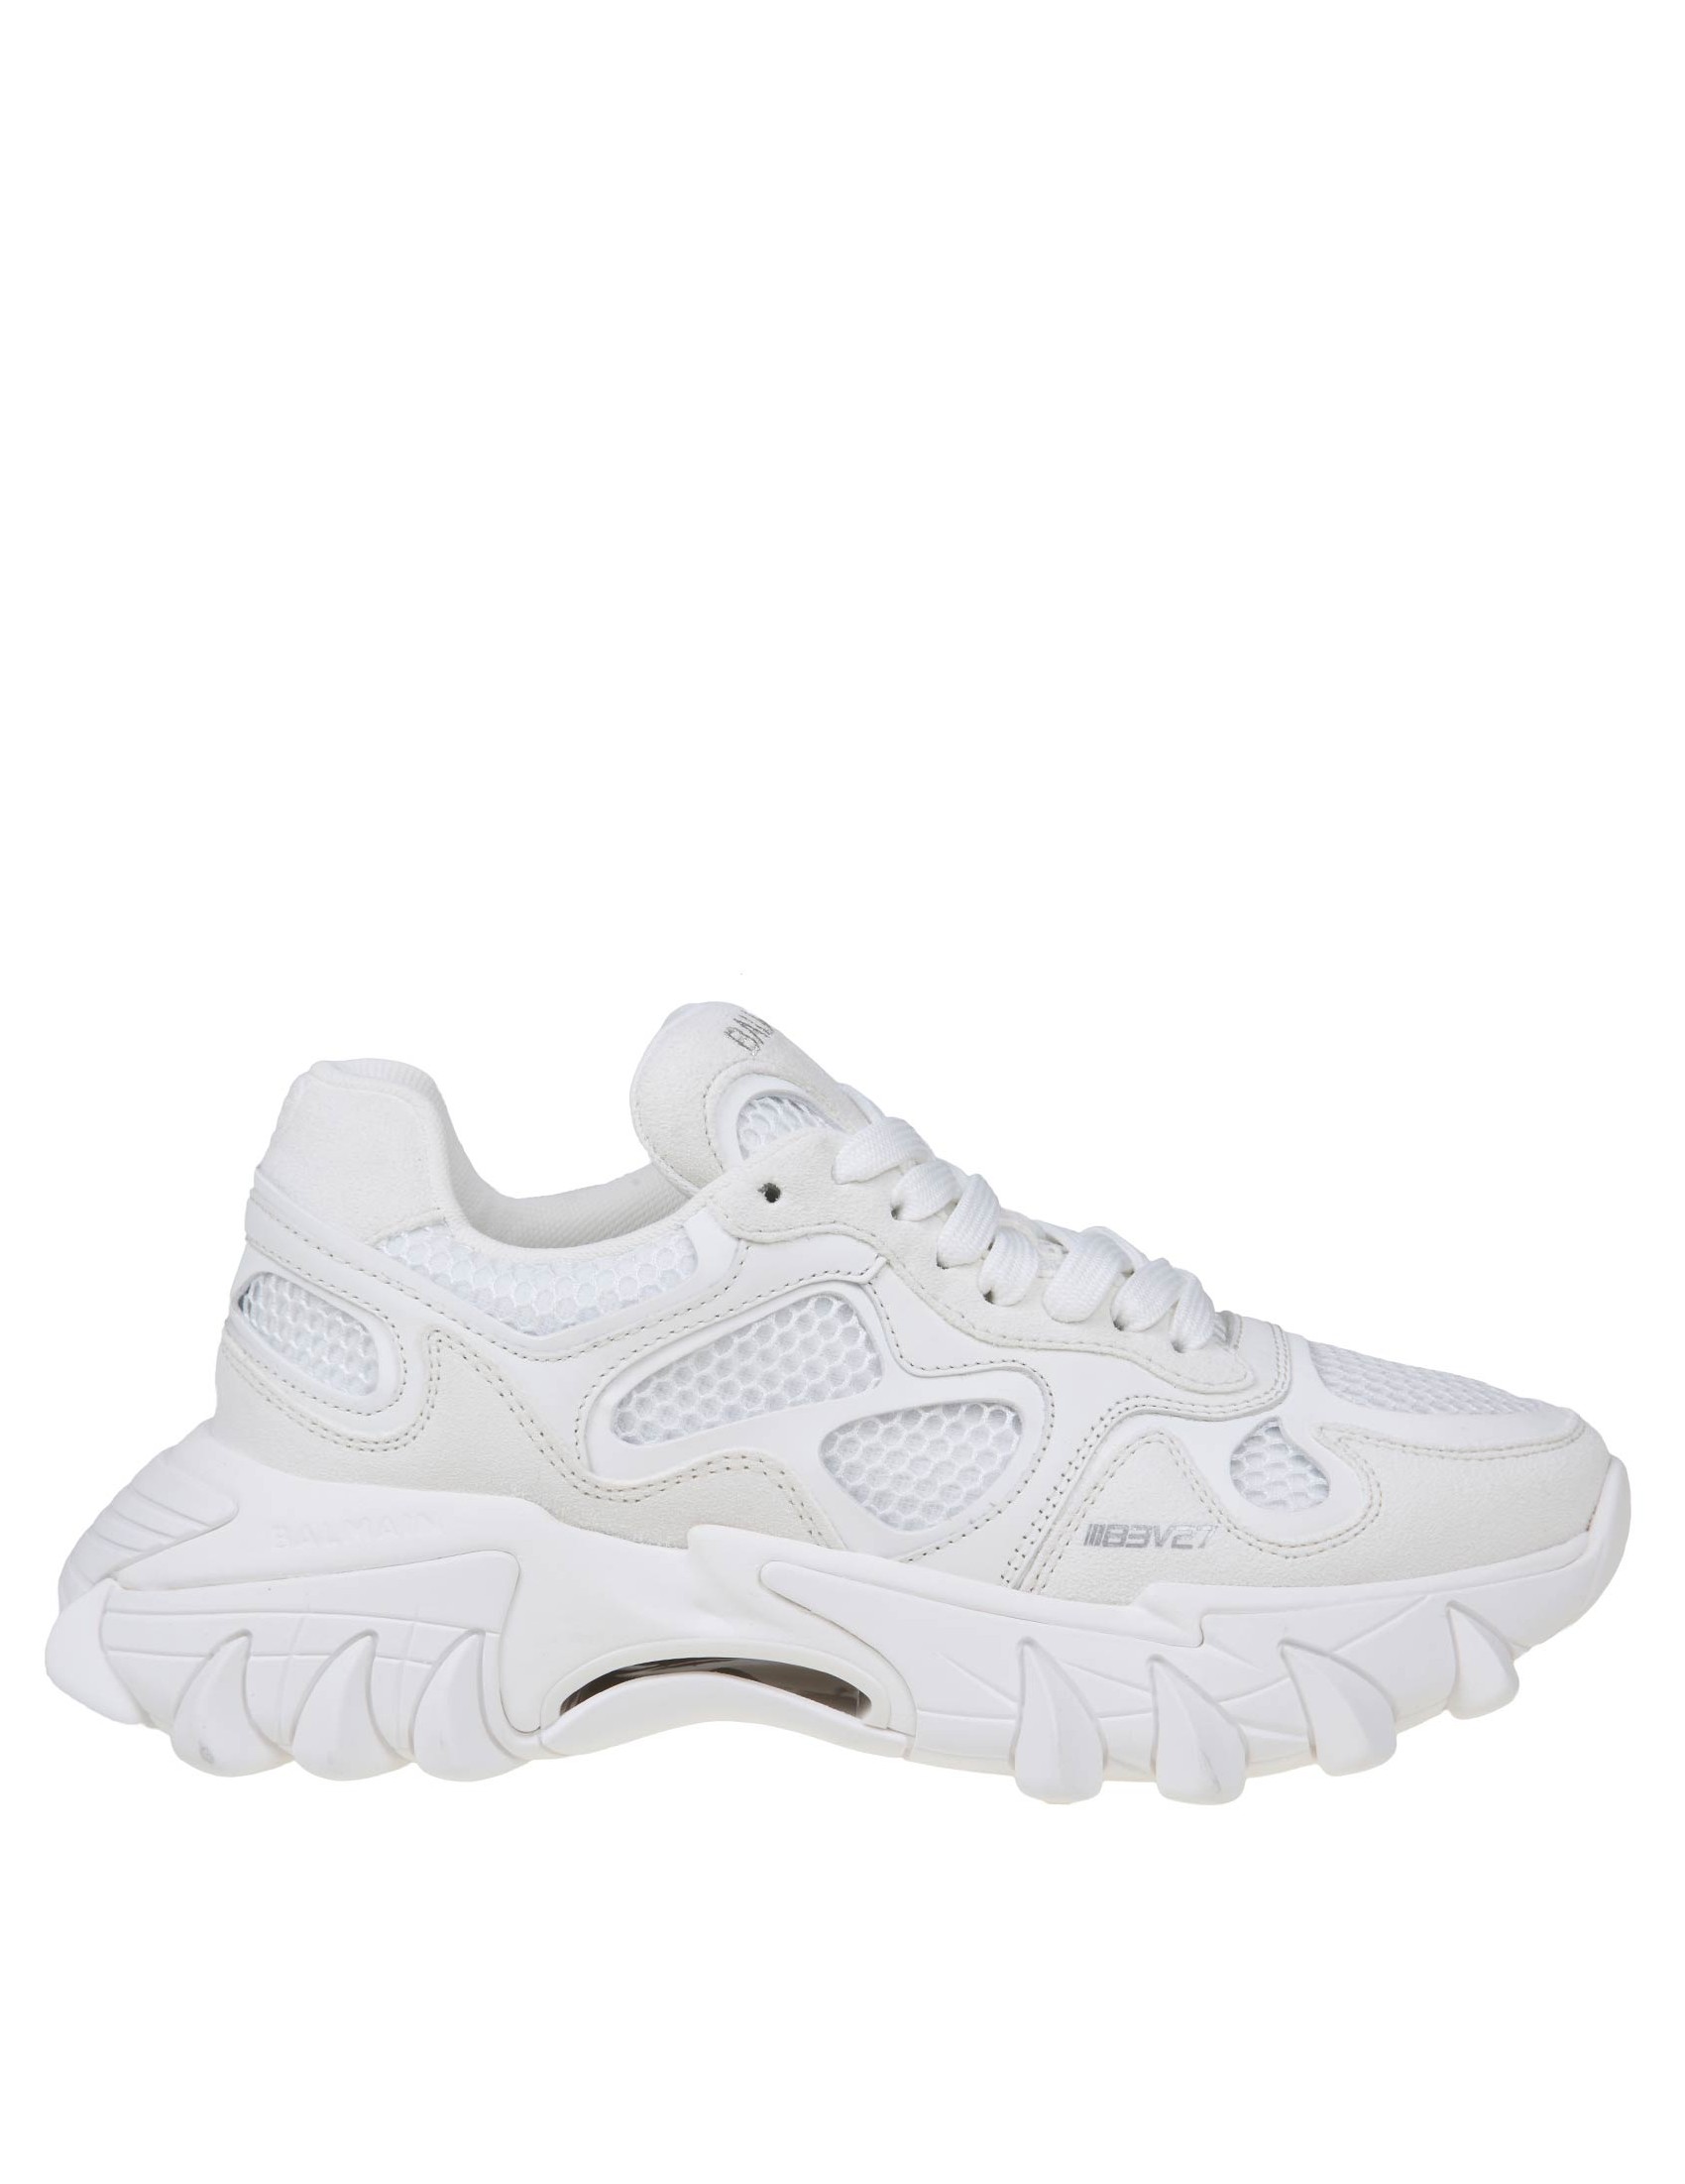 BALMAIN B-EAST SNEAKERS IN WHITE LEATHER AND MESH